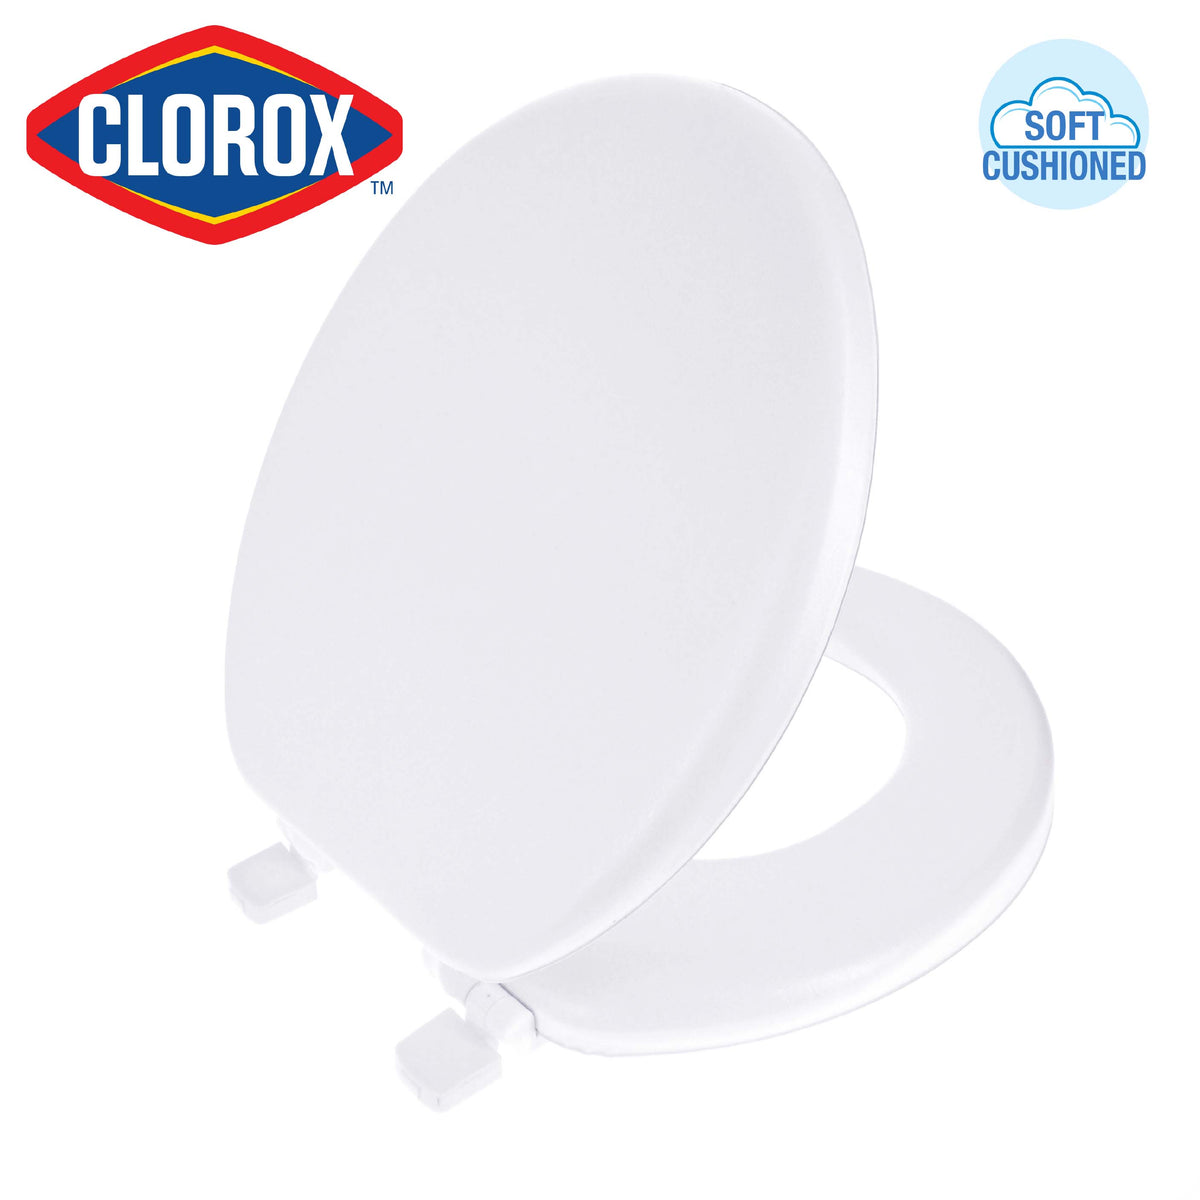 Clorox® Antimicrobial Round Soft Cushioned Toilet Seat – Ginsey 